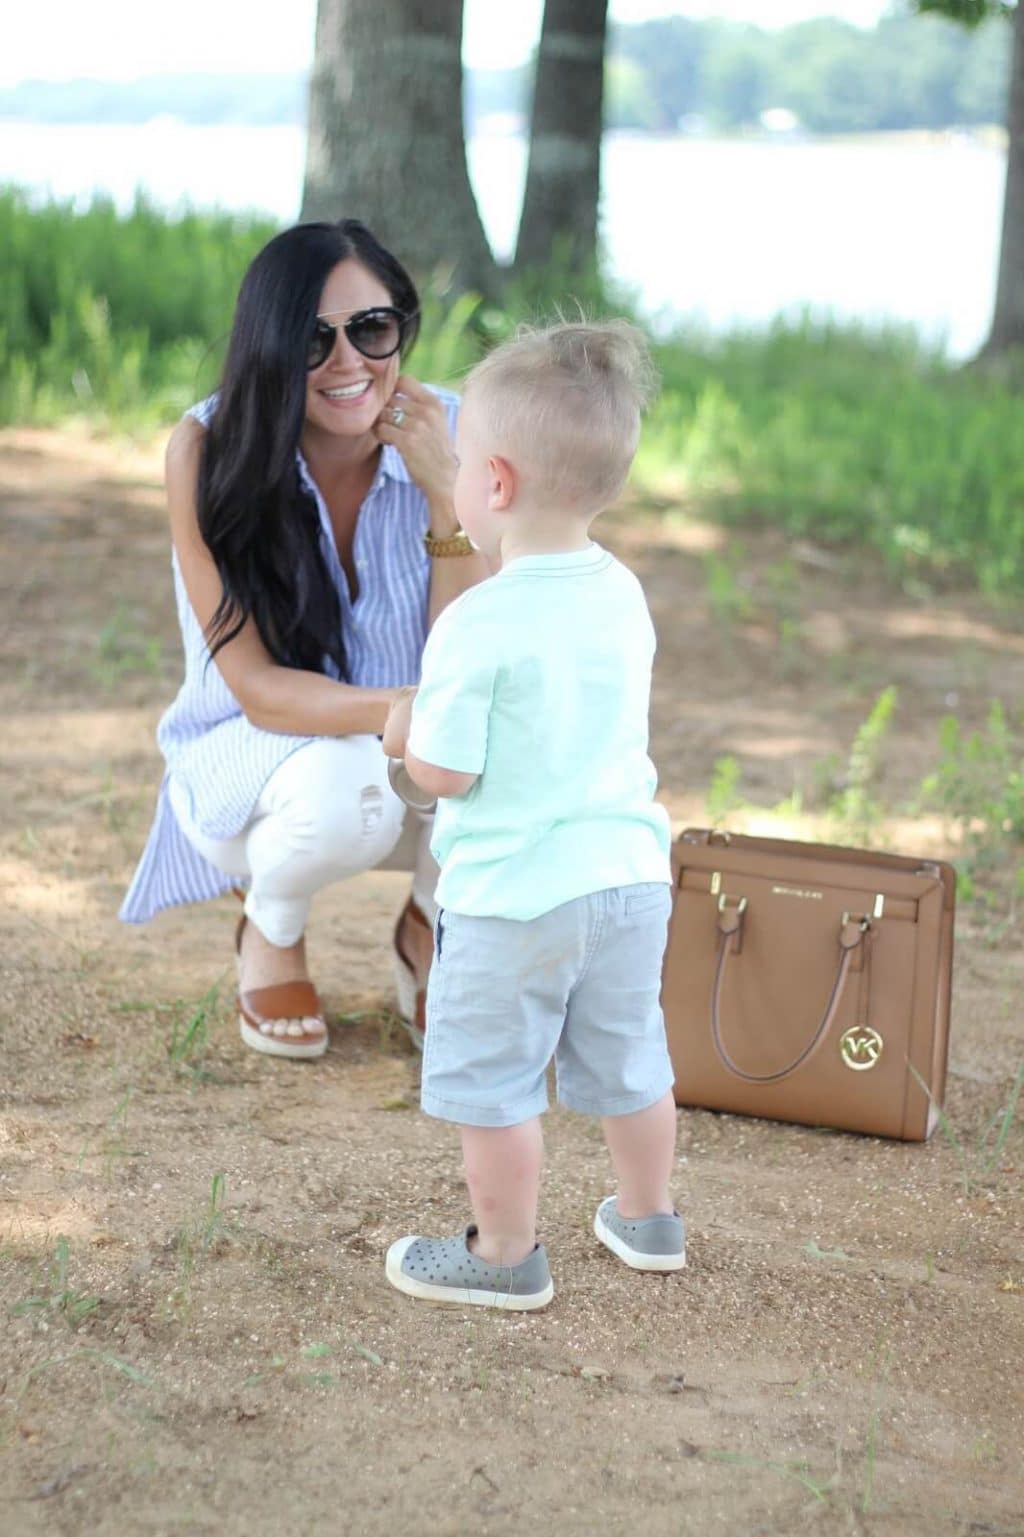 Stilettos and Diapers, Diaper bag to purse transition, Boymom, Michael Kors